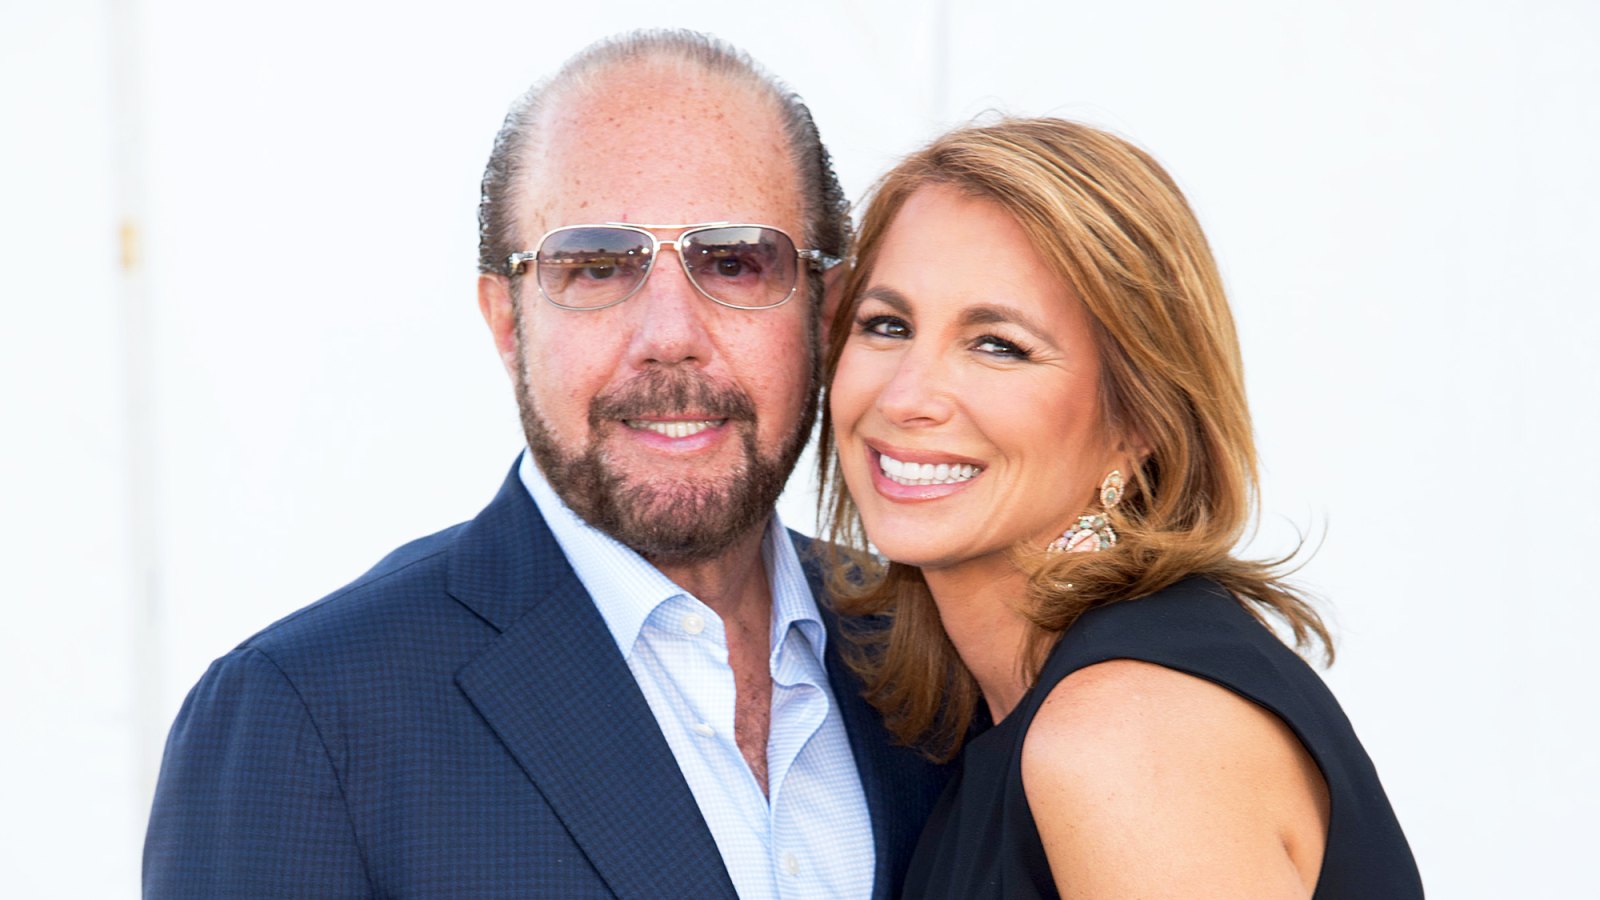 Jill Zarin and husband Bobby Zarinattend the Samuel Waxman Cancer Research Foundation 11th Annual A Hamptons Happening in Southampton, New York.